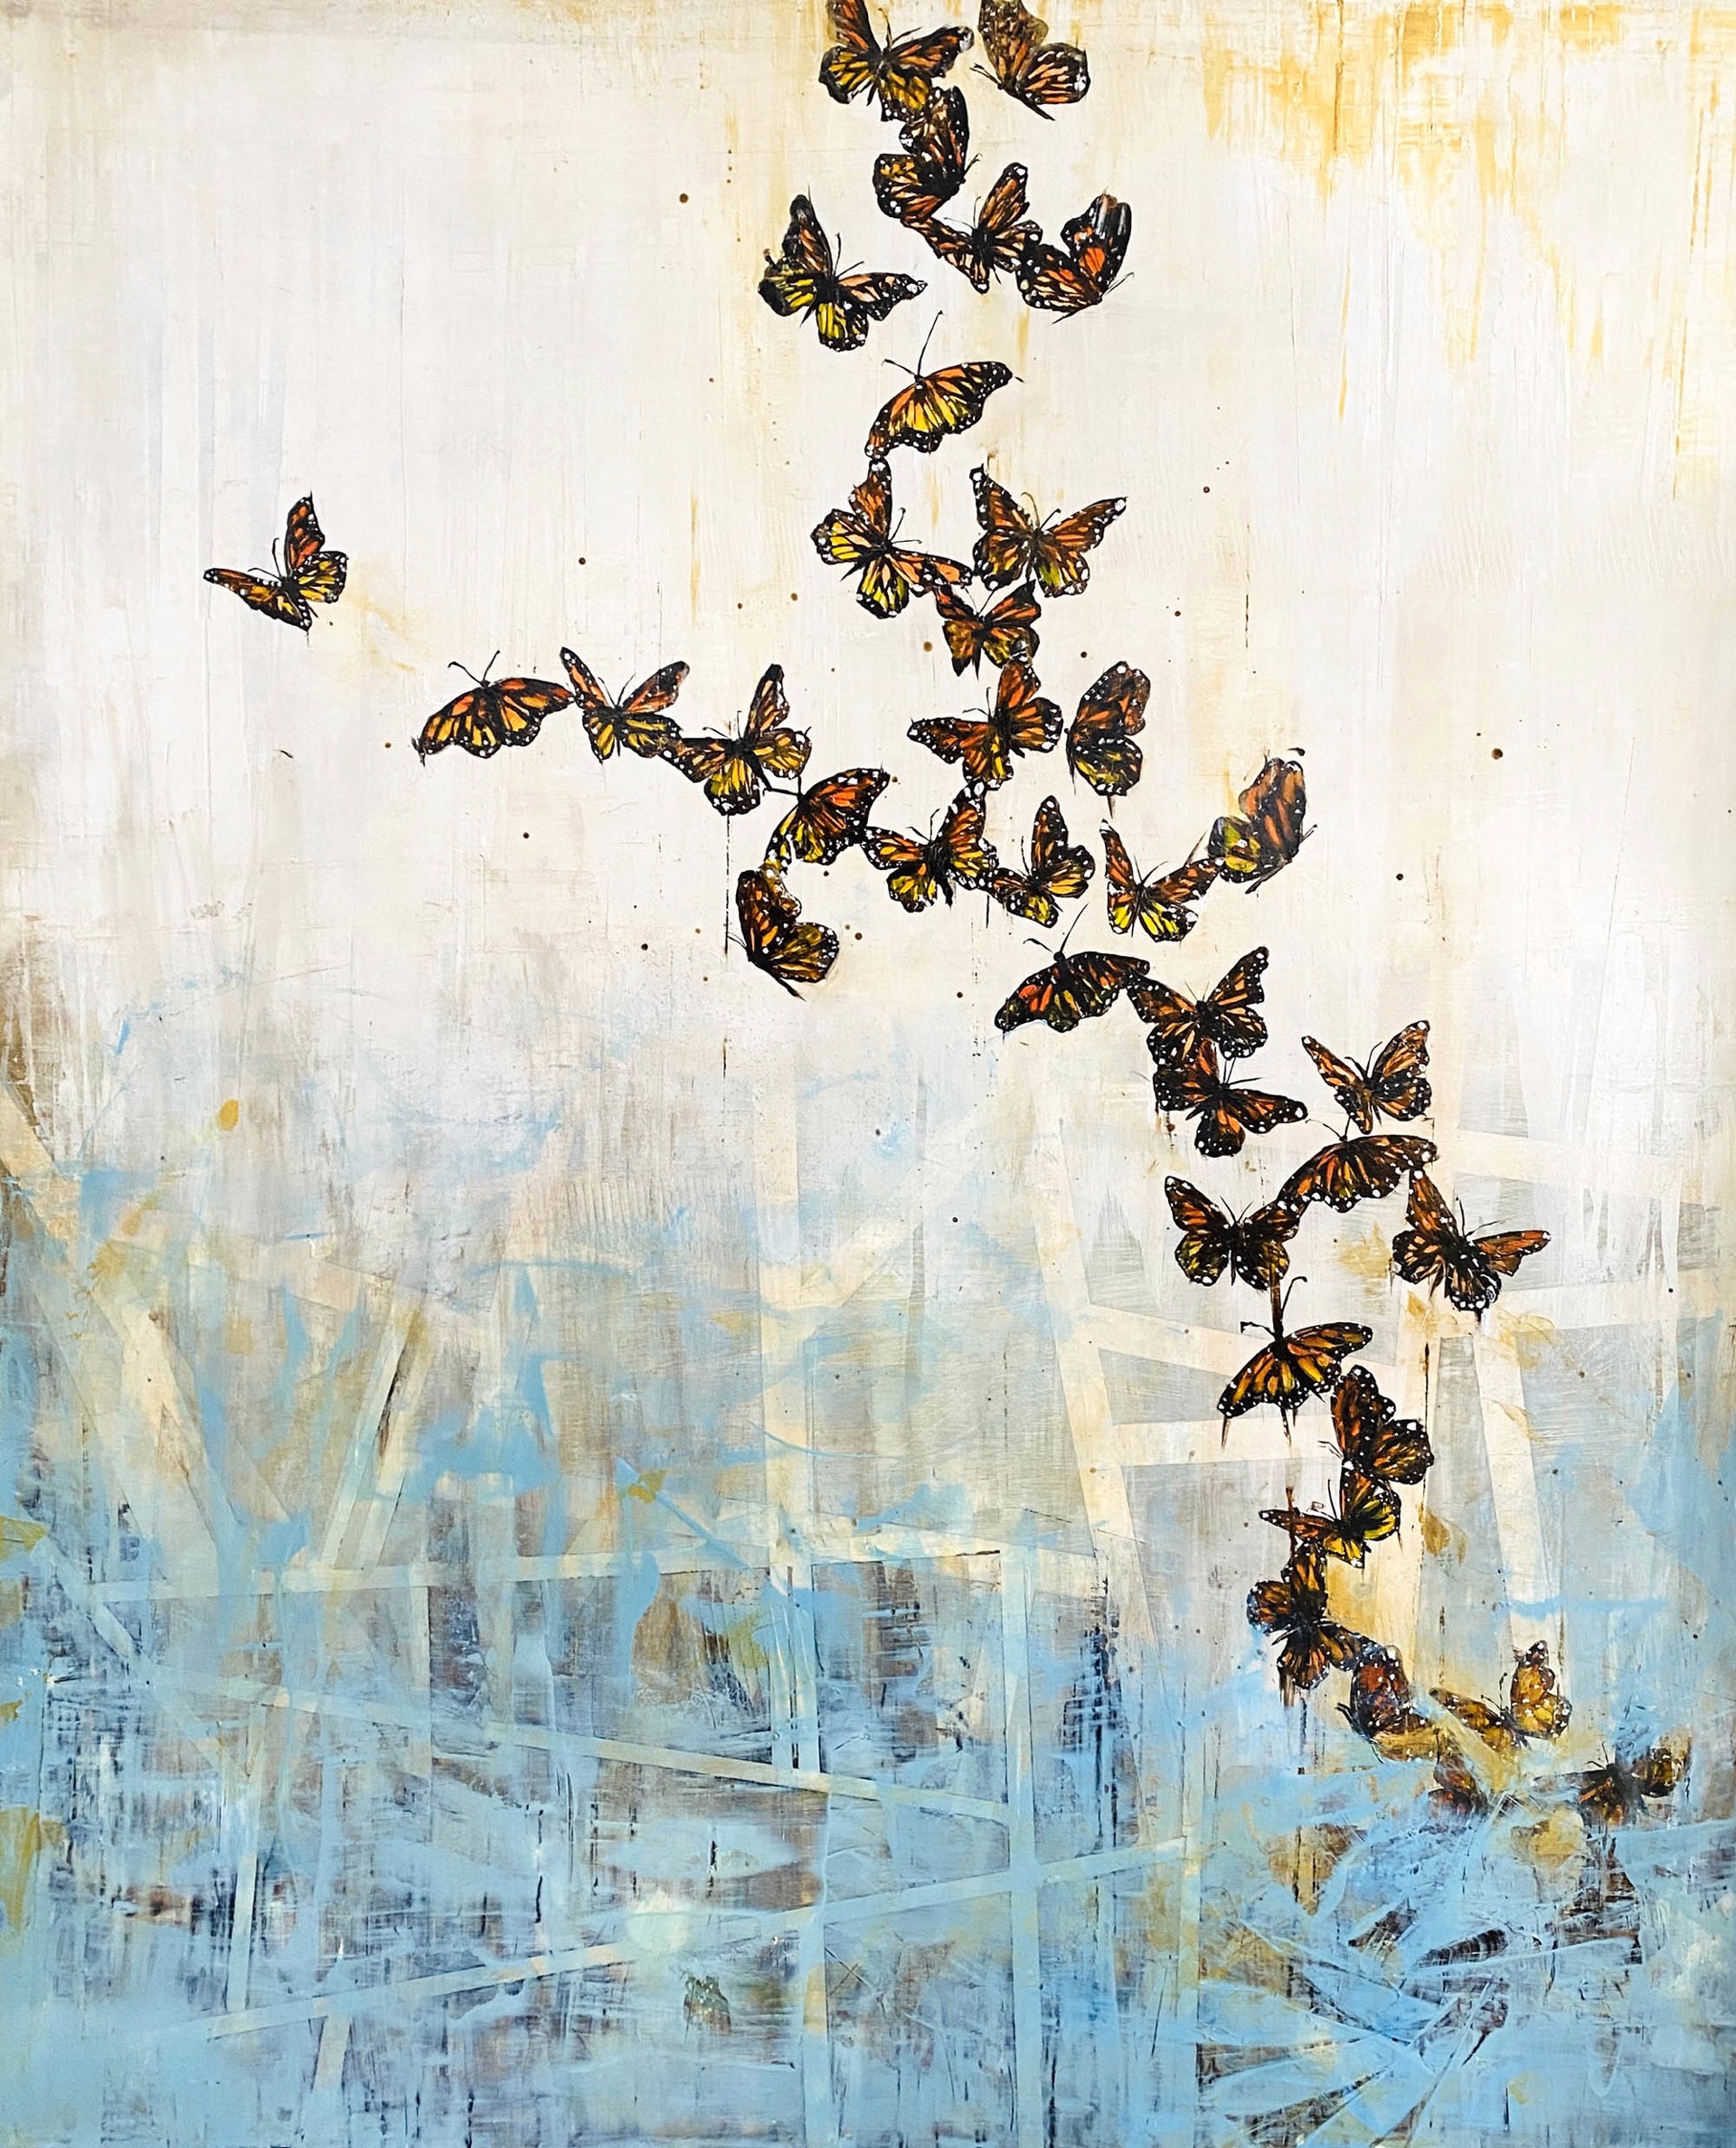 Original Oil Painting Featuring A Flurry Of Monarch Butterflies Over Abstract Blue Background